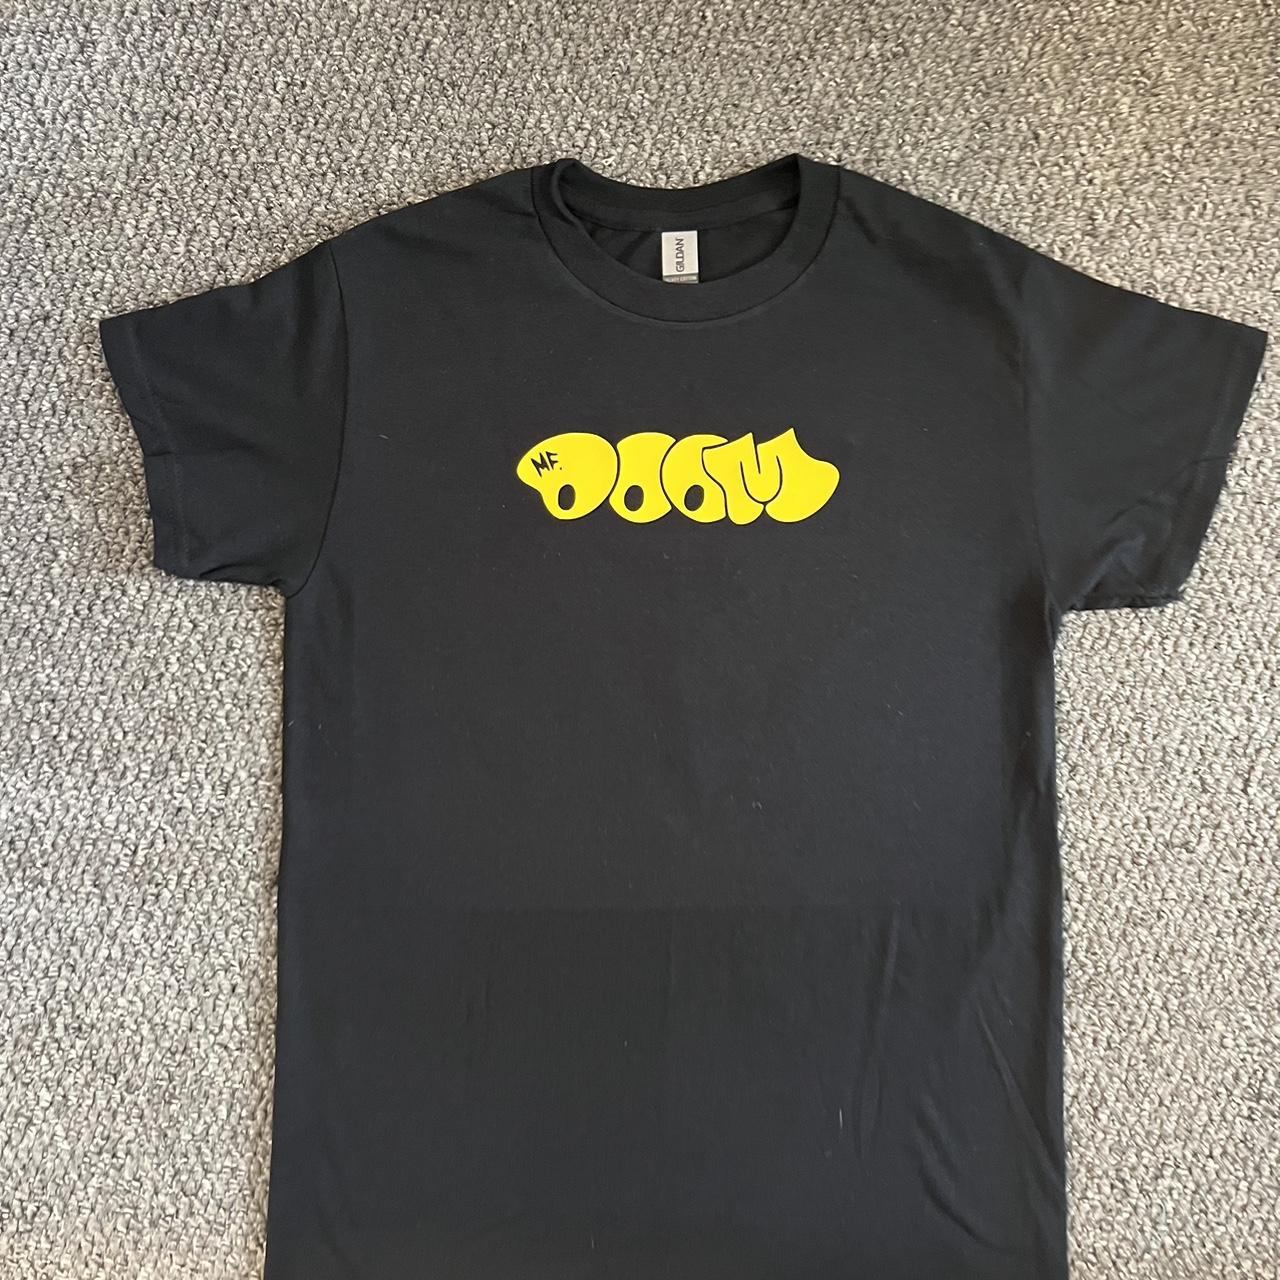 MF Doom Logo Tee (Yellow) Available in all... - Depop